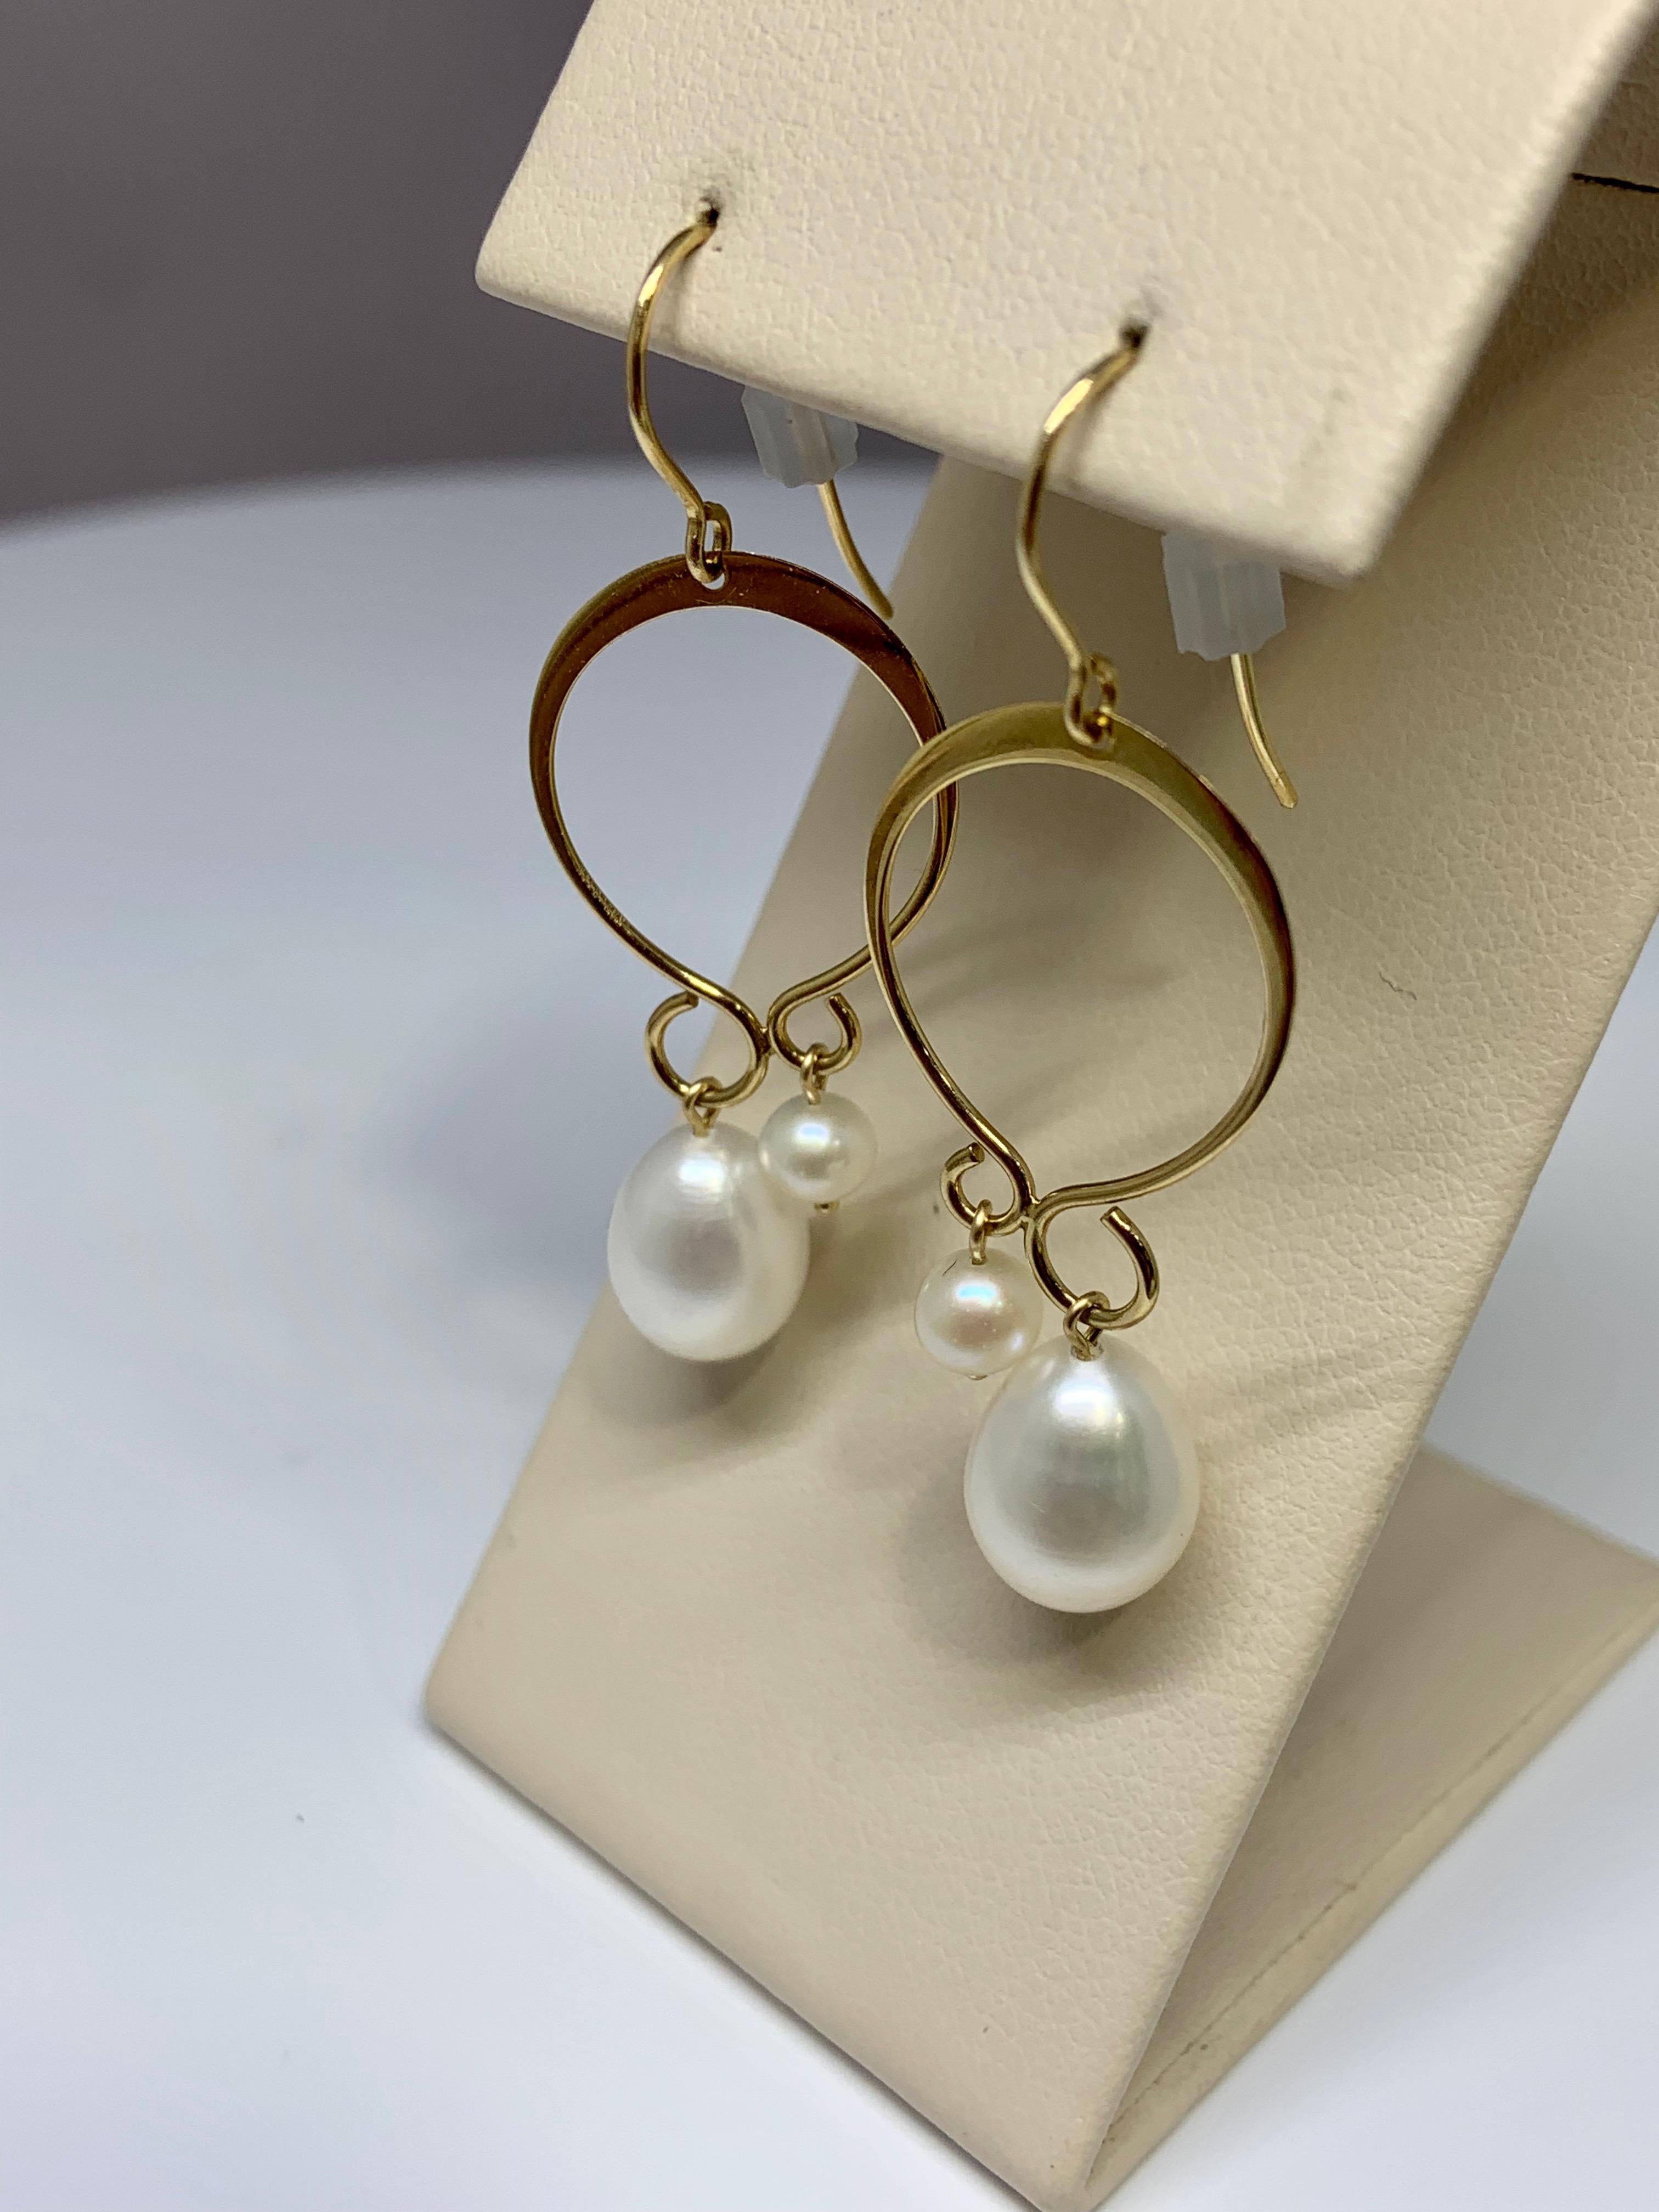 These gorgeous earrings include two beautiful staggered freshwater pearls per earring. The beautiful circular drop design gives these earrings an artsy appearance. These earrings are crafted out of 14K yellow gold. The largest pearls measure around